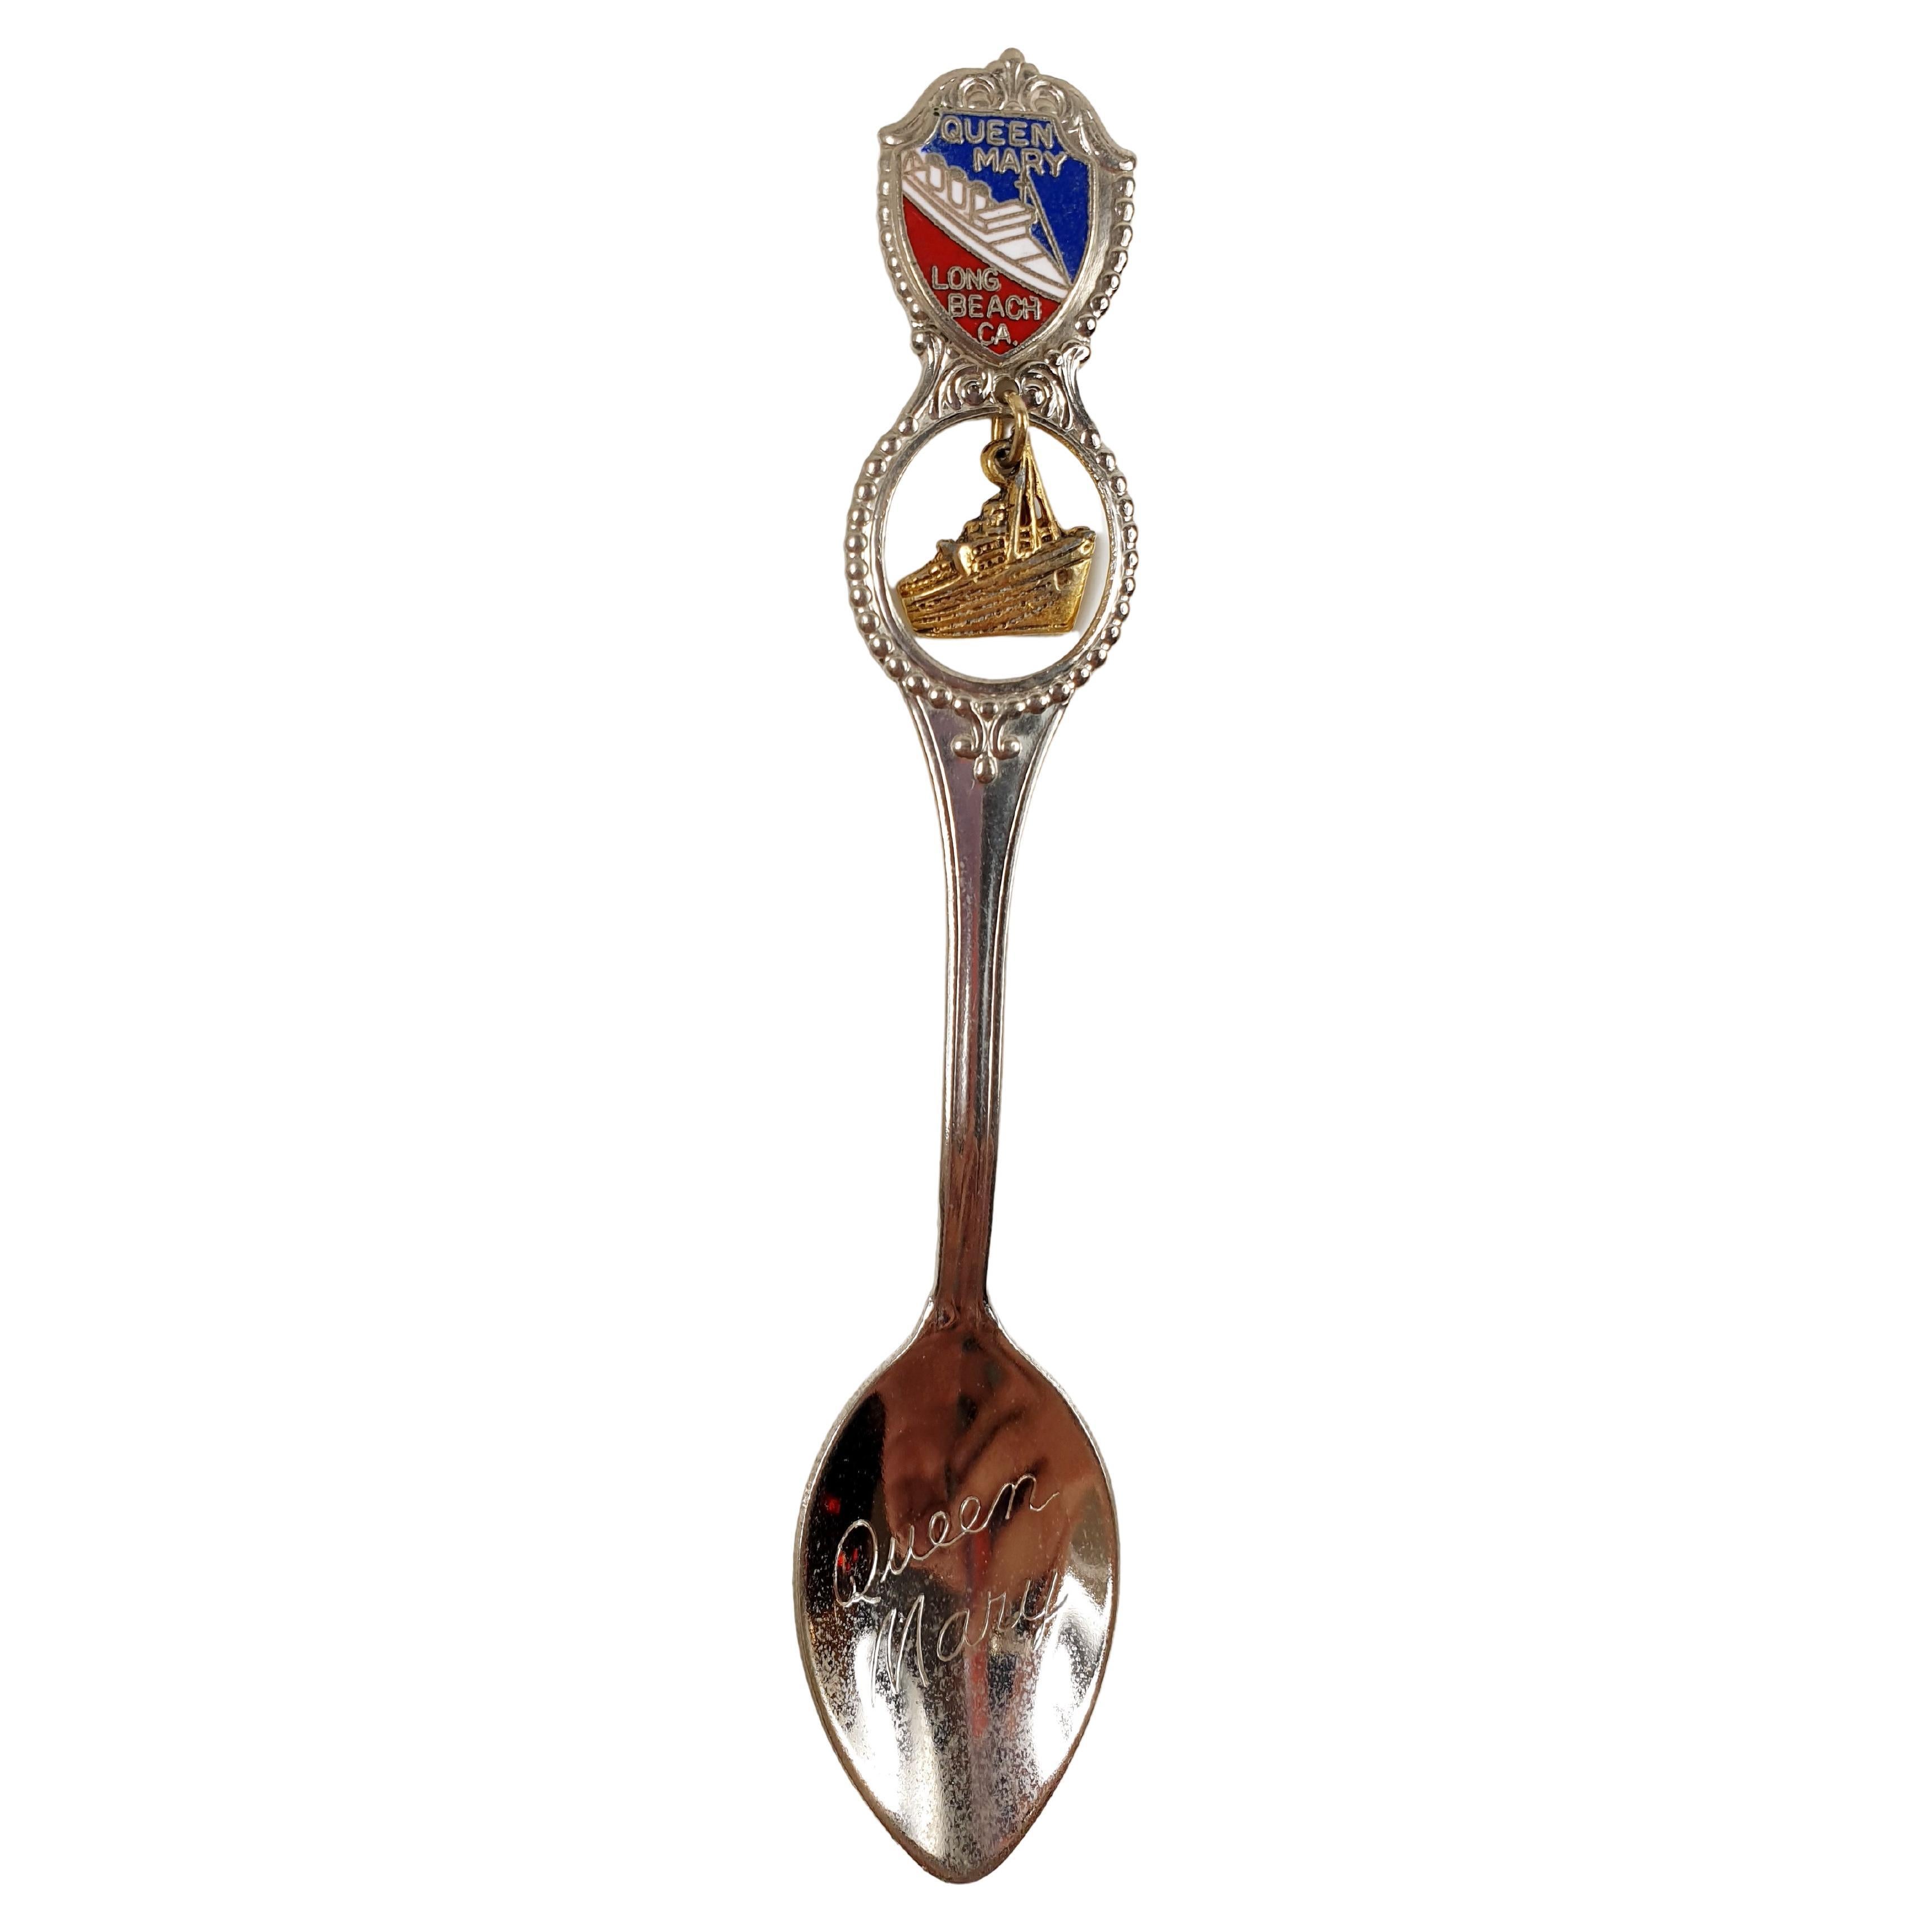 Queen Mary Collection Silver Teaspoon with Figurine For Sale